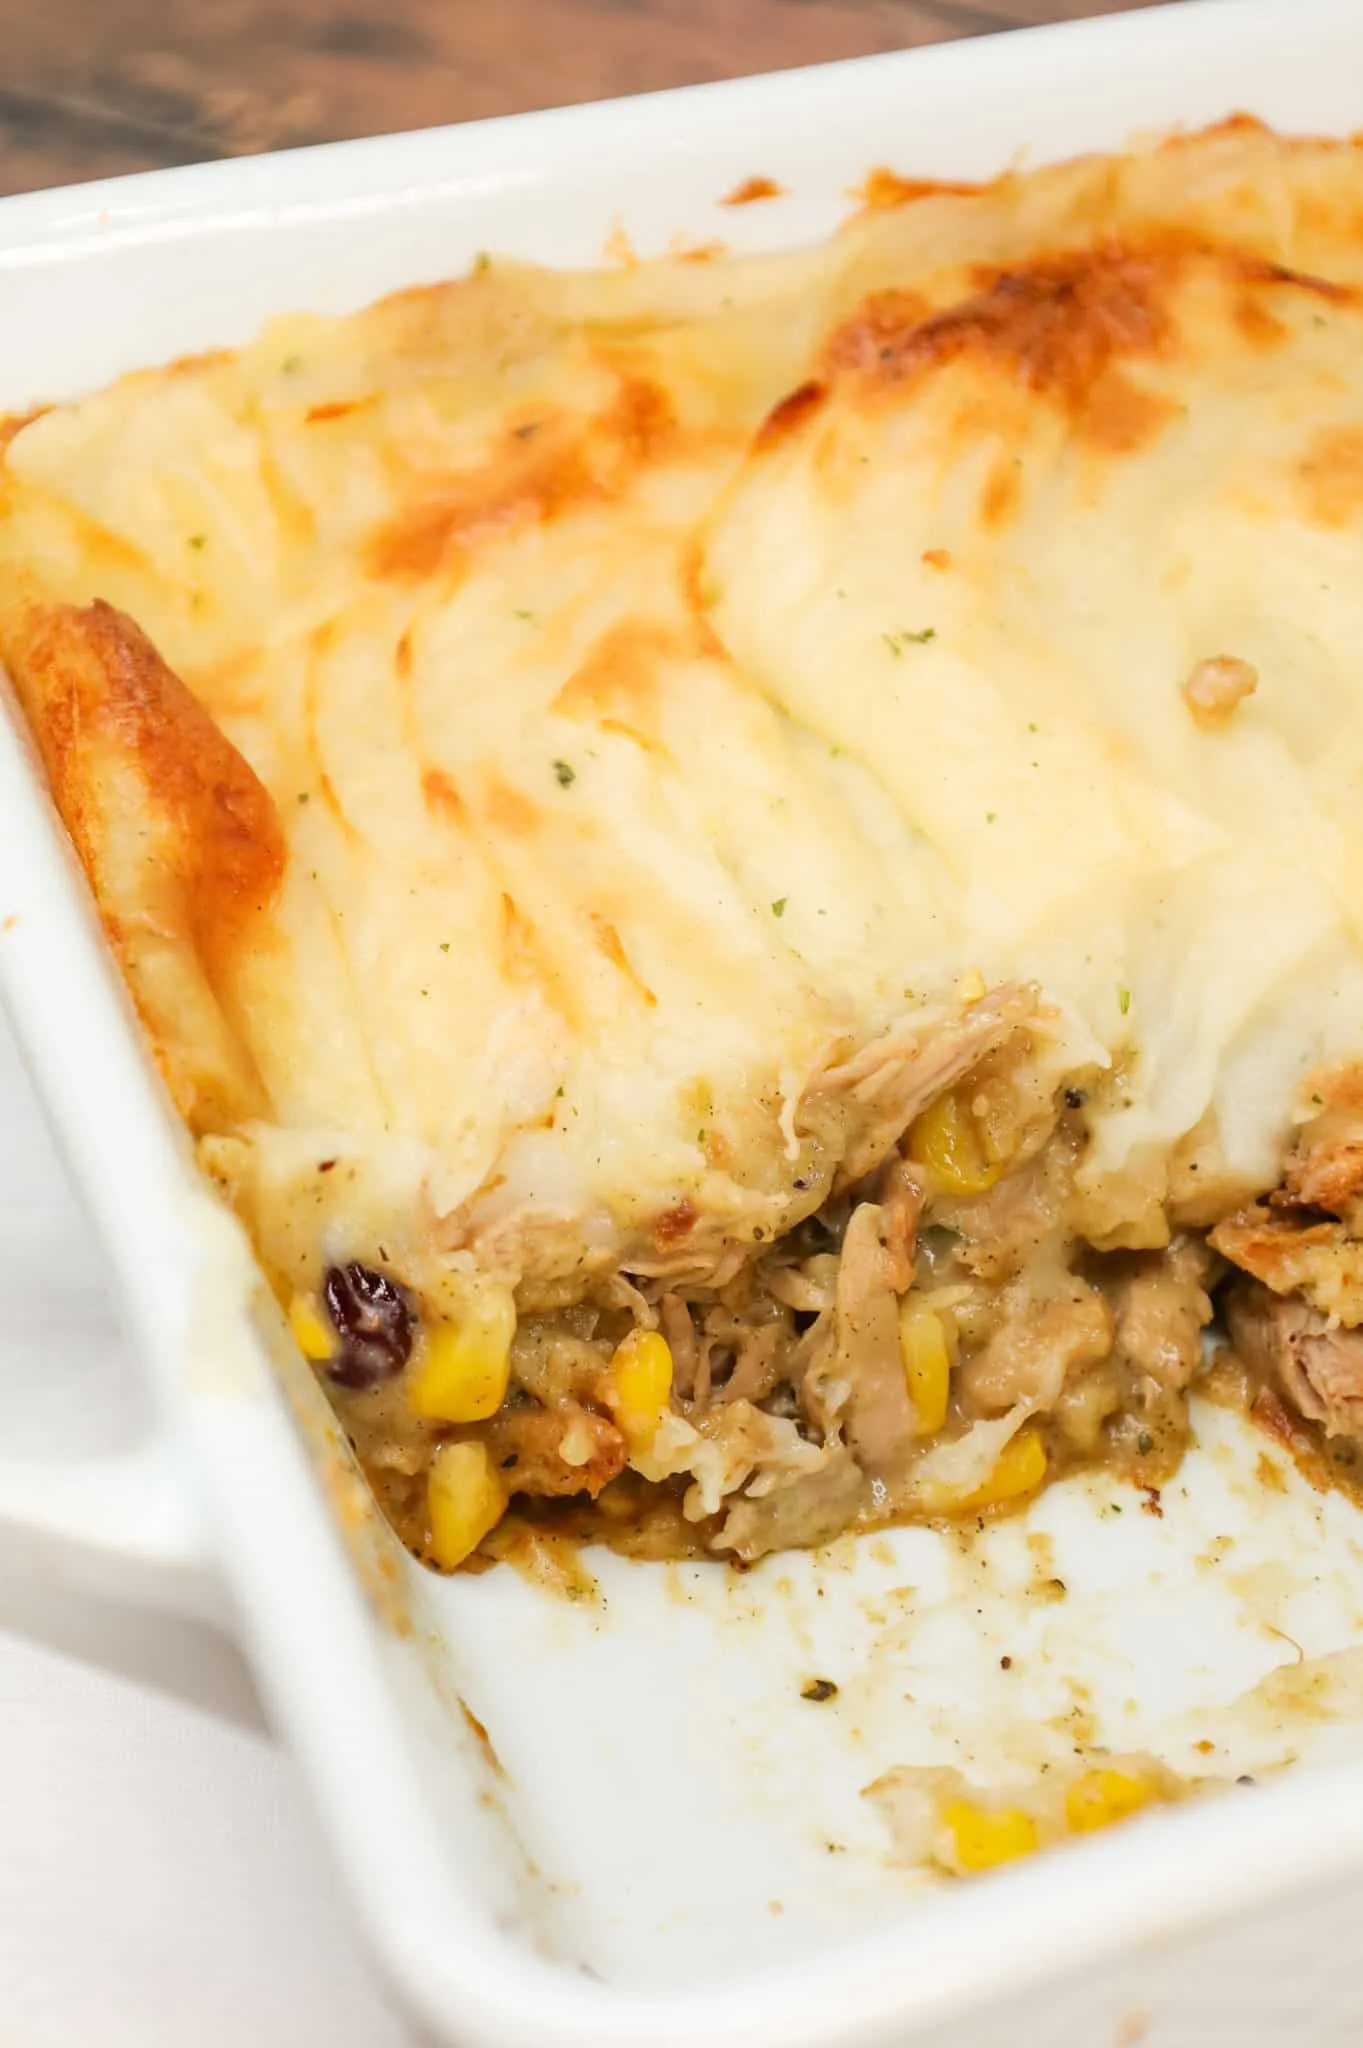 Turkey Shepherd's Pie is a hearty dinner recipe loaded with shredded turkey, corn, Stove Top stuffing mix, cream of chicken soup, cranberries and topped with mashed potatoes.